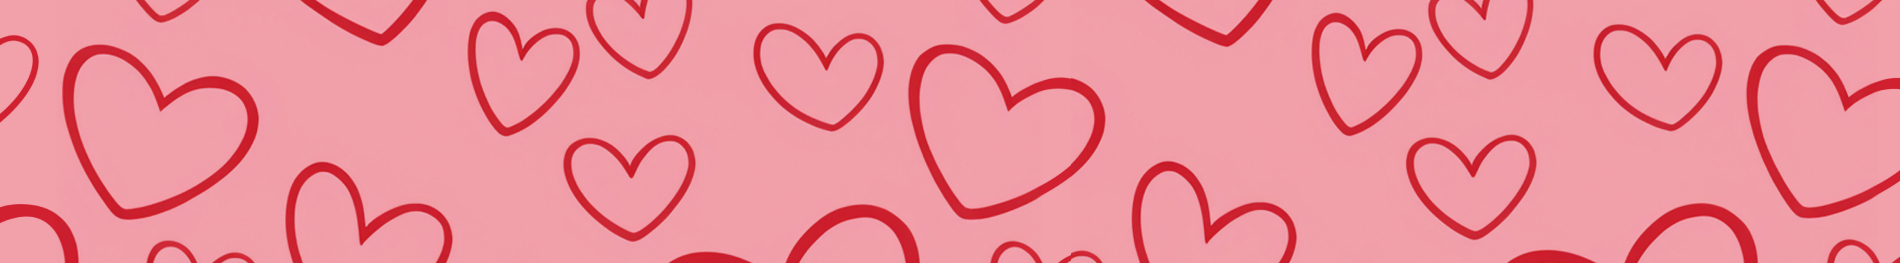 Hearts on a pink background.